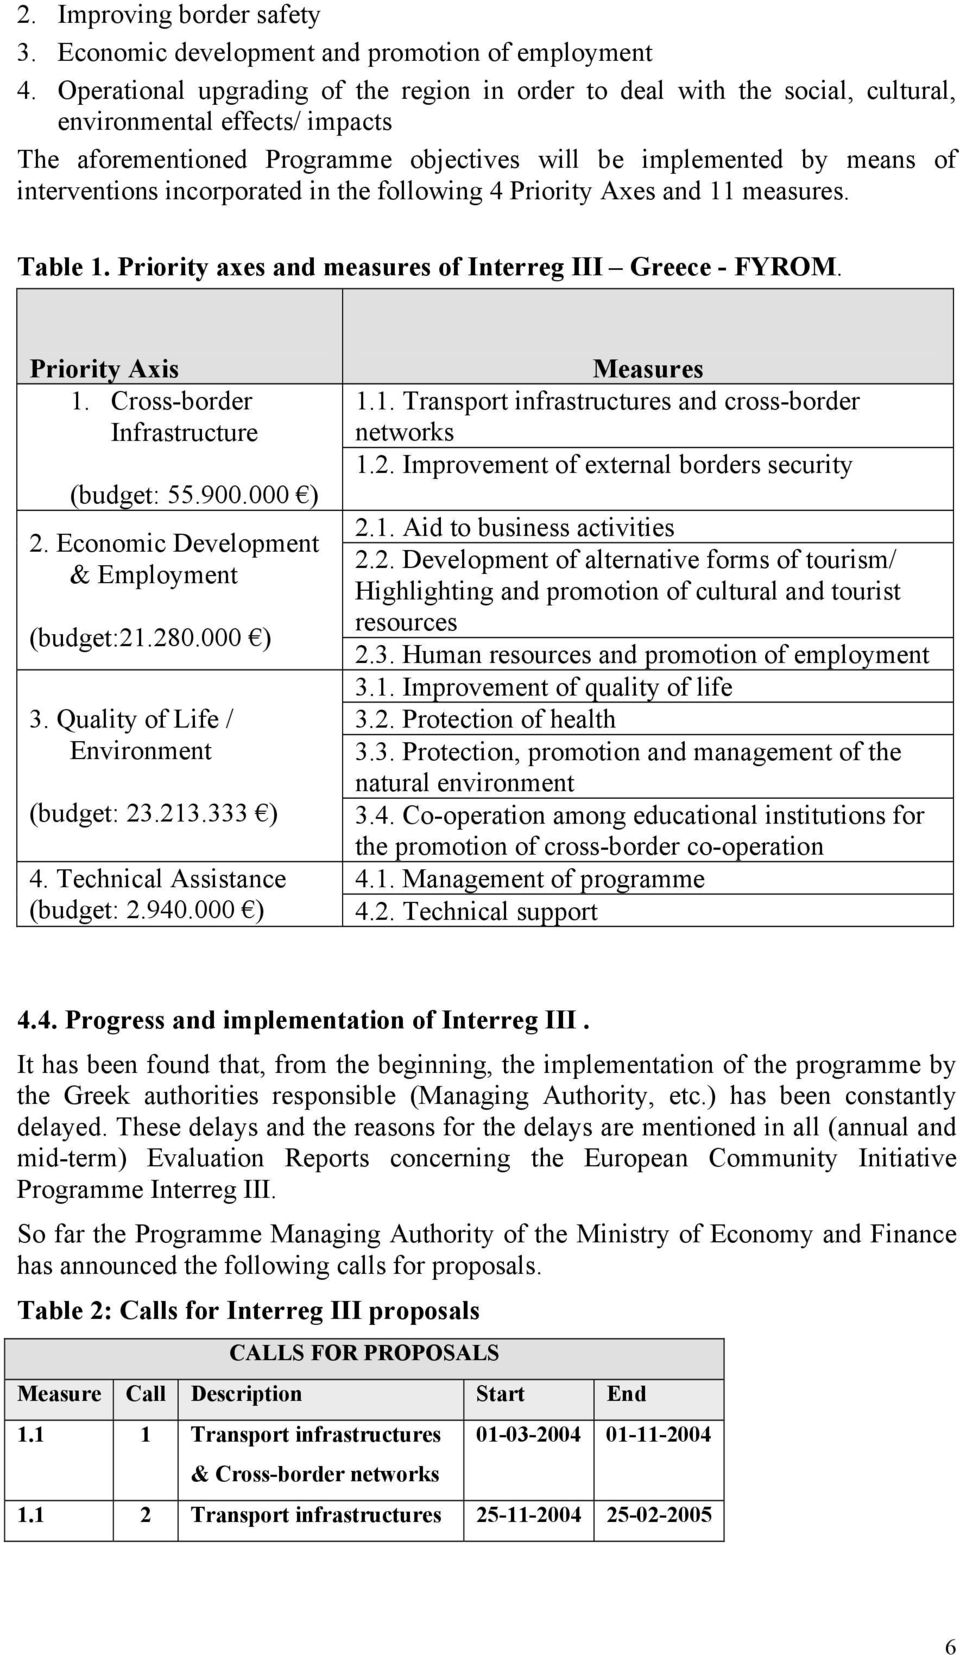 incorporated in the following 4 Priority Axes and 11 measures. Table 1. Priority axes and measures of Interreg III Greece - FYROM. Priority Axis 1. Cross-border Infrastructure (budget: 55.900.000 ) 2.